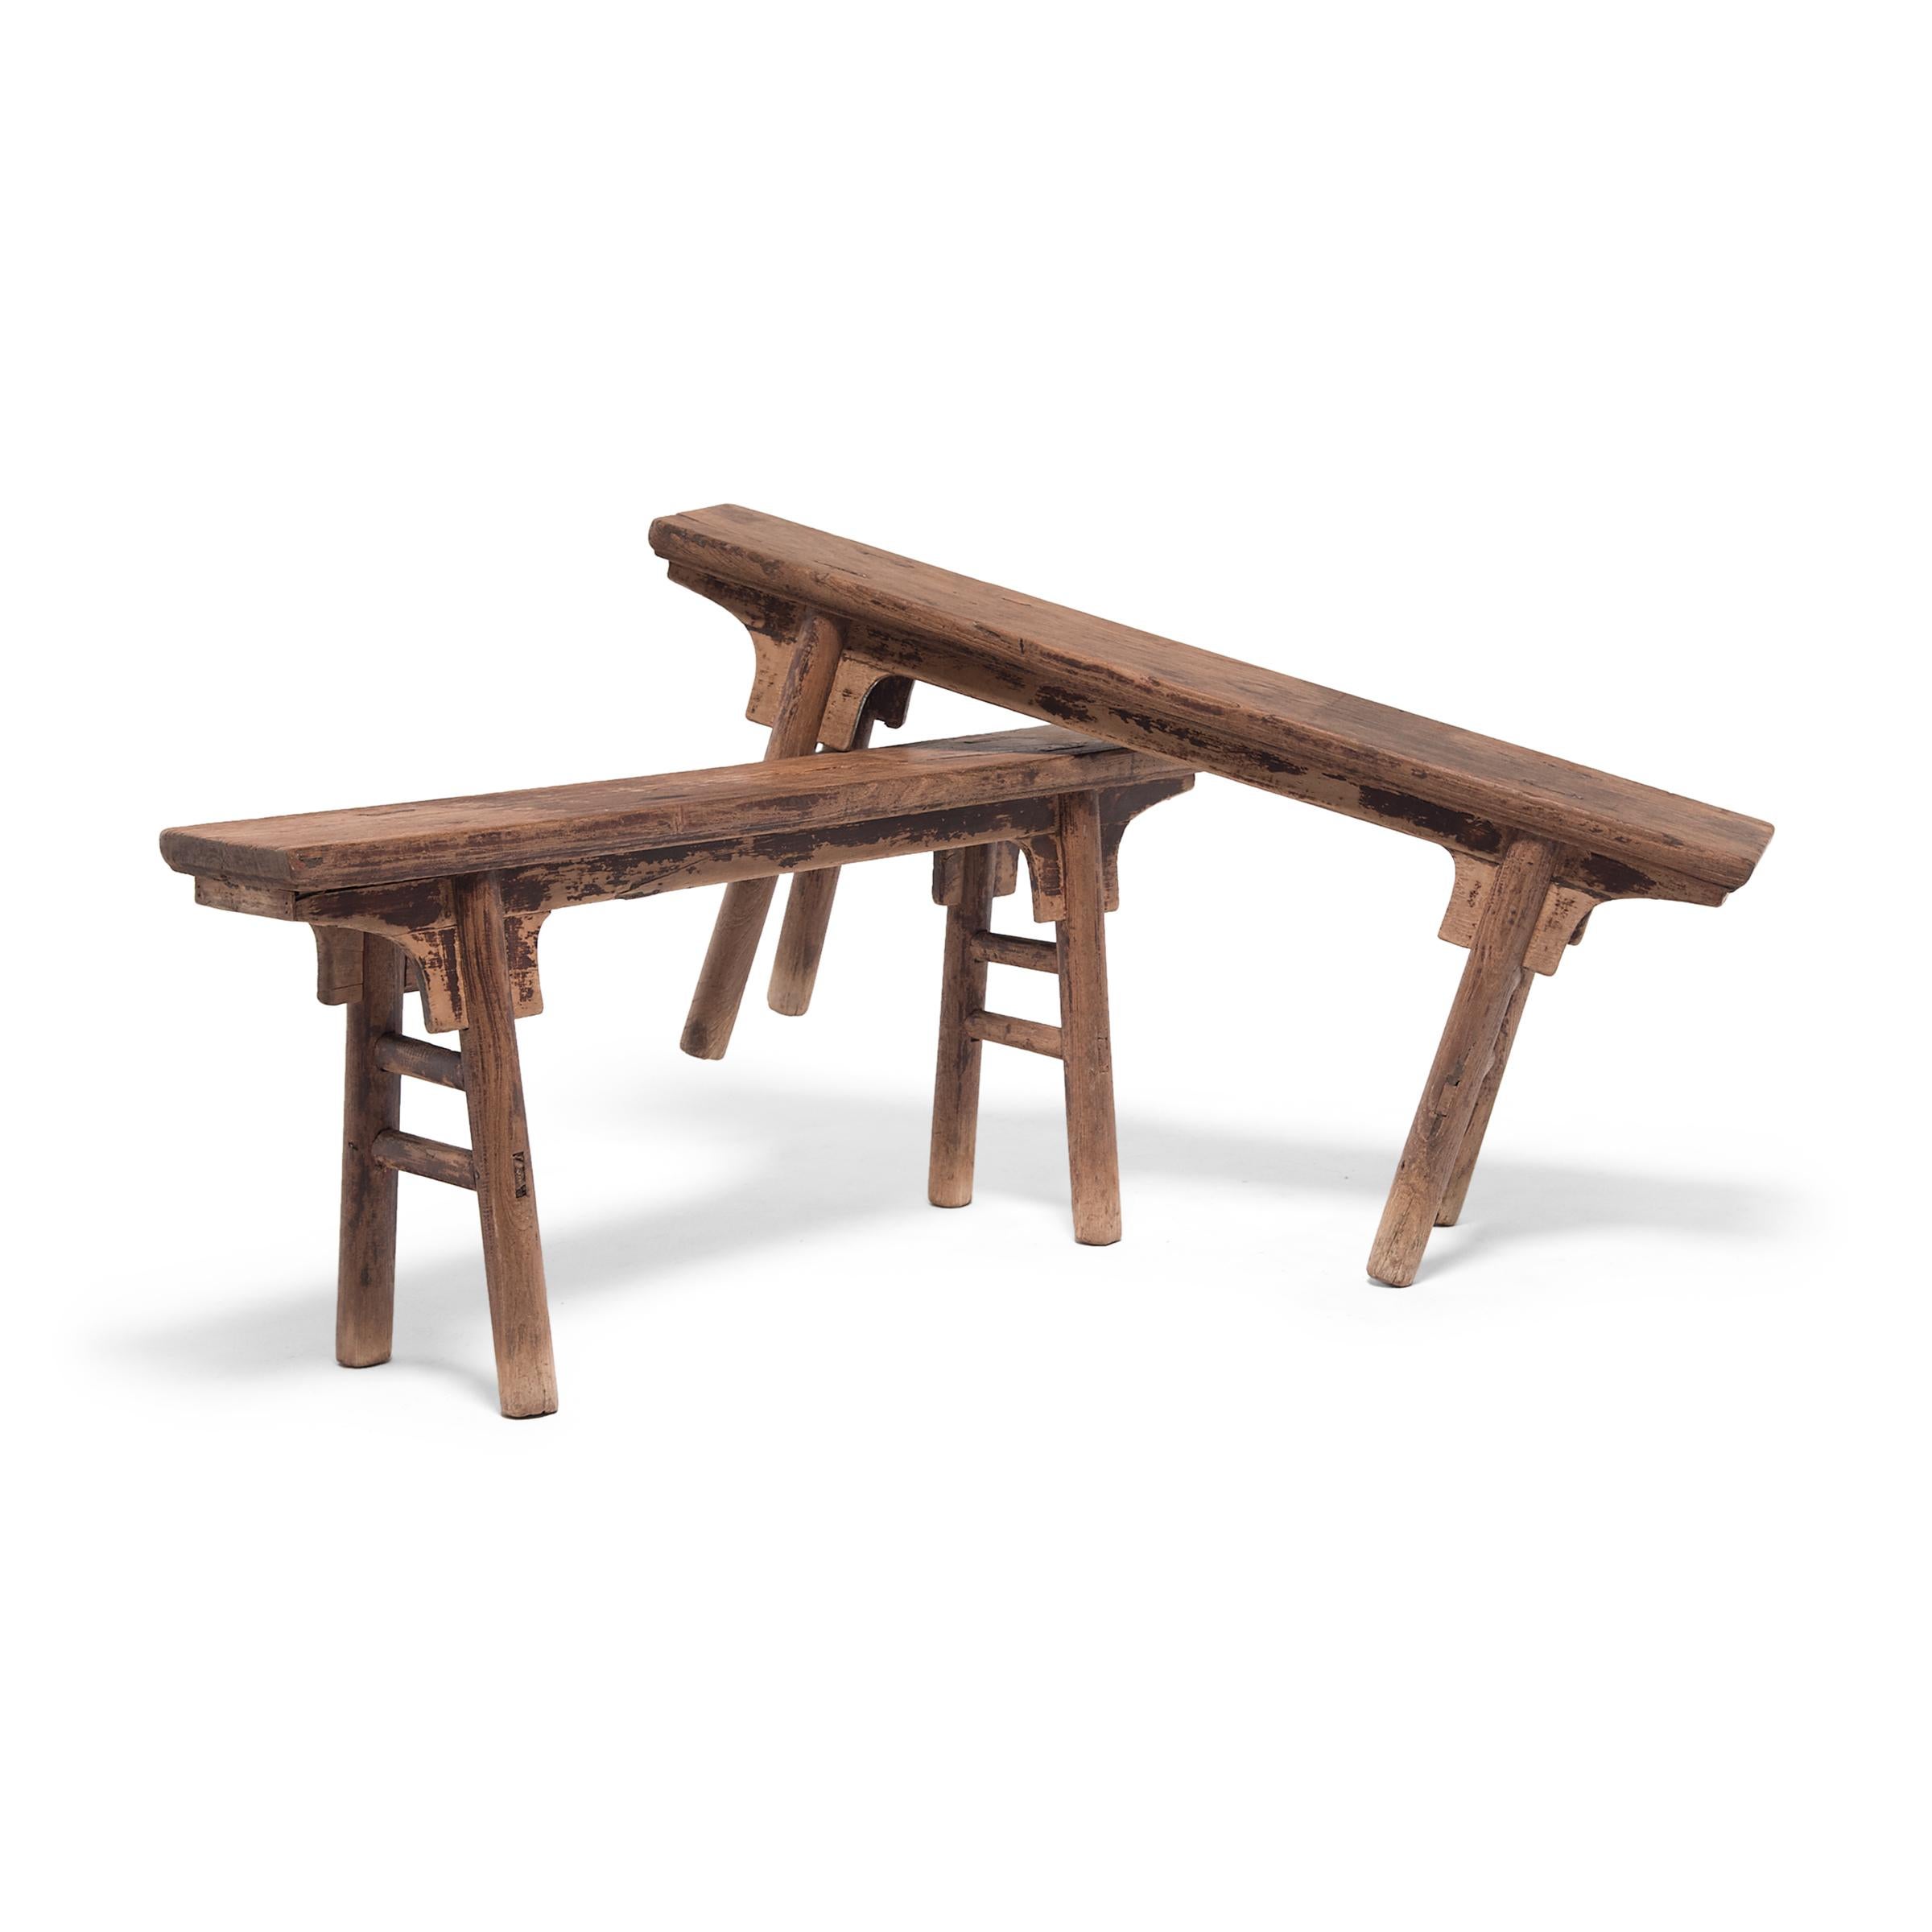 Dated to the early 20th century, these provincial benches from China's Hebei province feature a plank-top two-person seat supported by splayed round legs with double stretcher bars. The original dark finish has faded over time for a weathered look